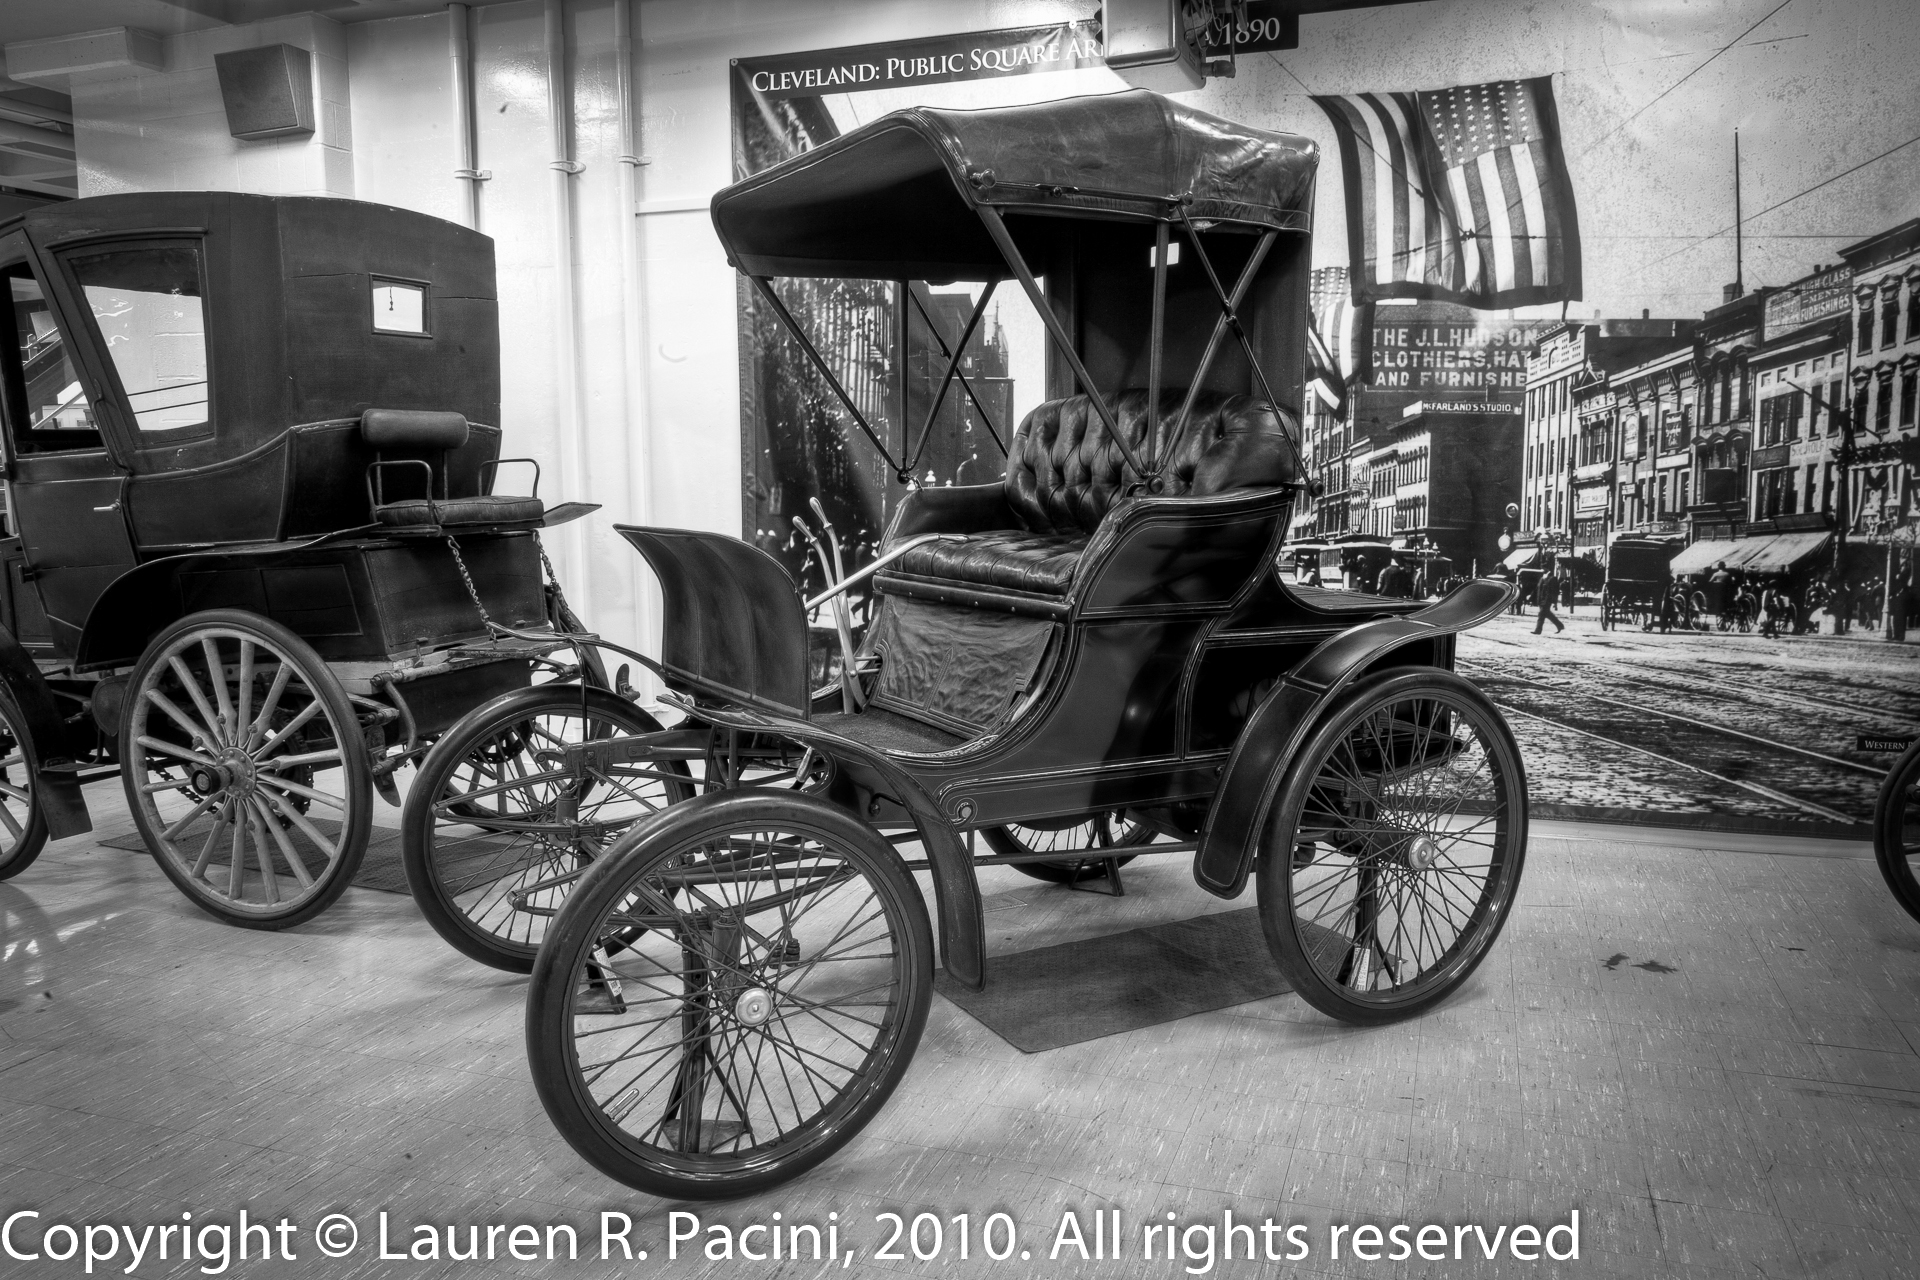 1899 Winton Phaeton - Property of the Western Reserve Historical Society Crawford Auto Collection